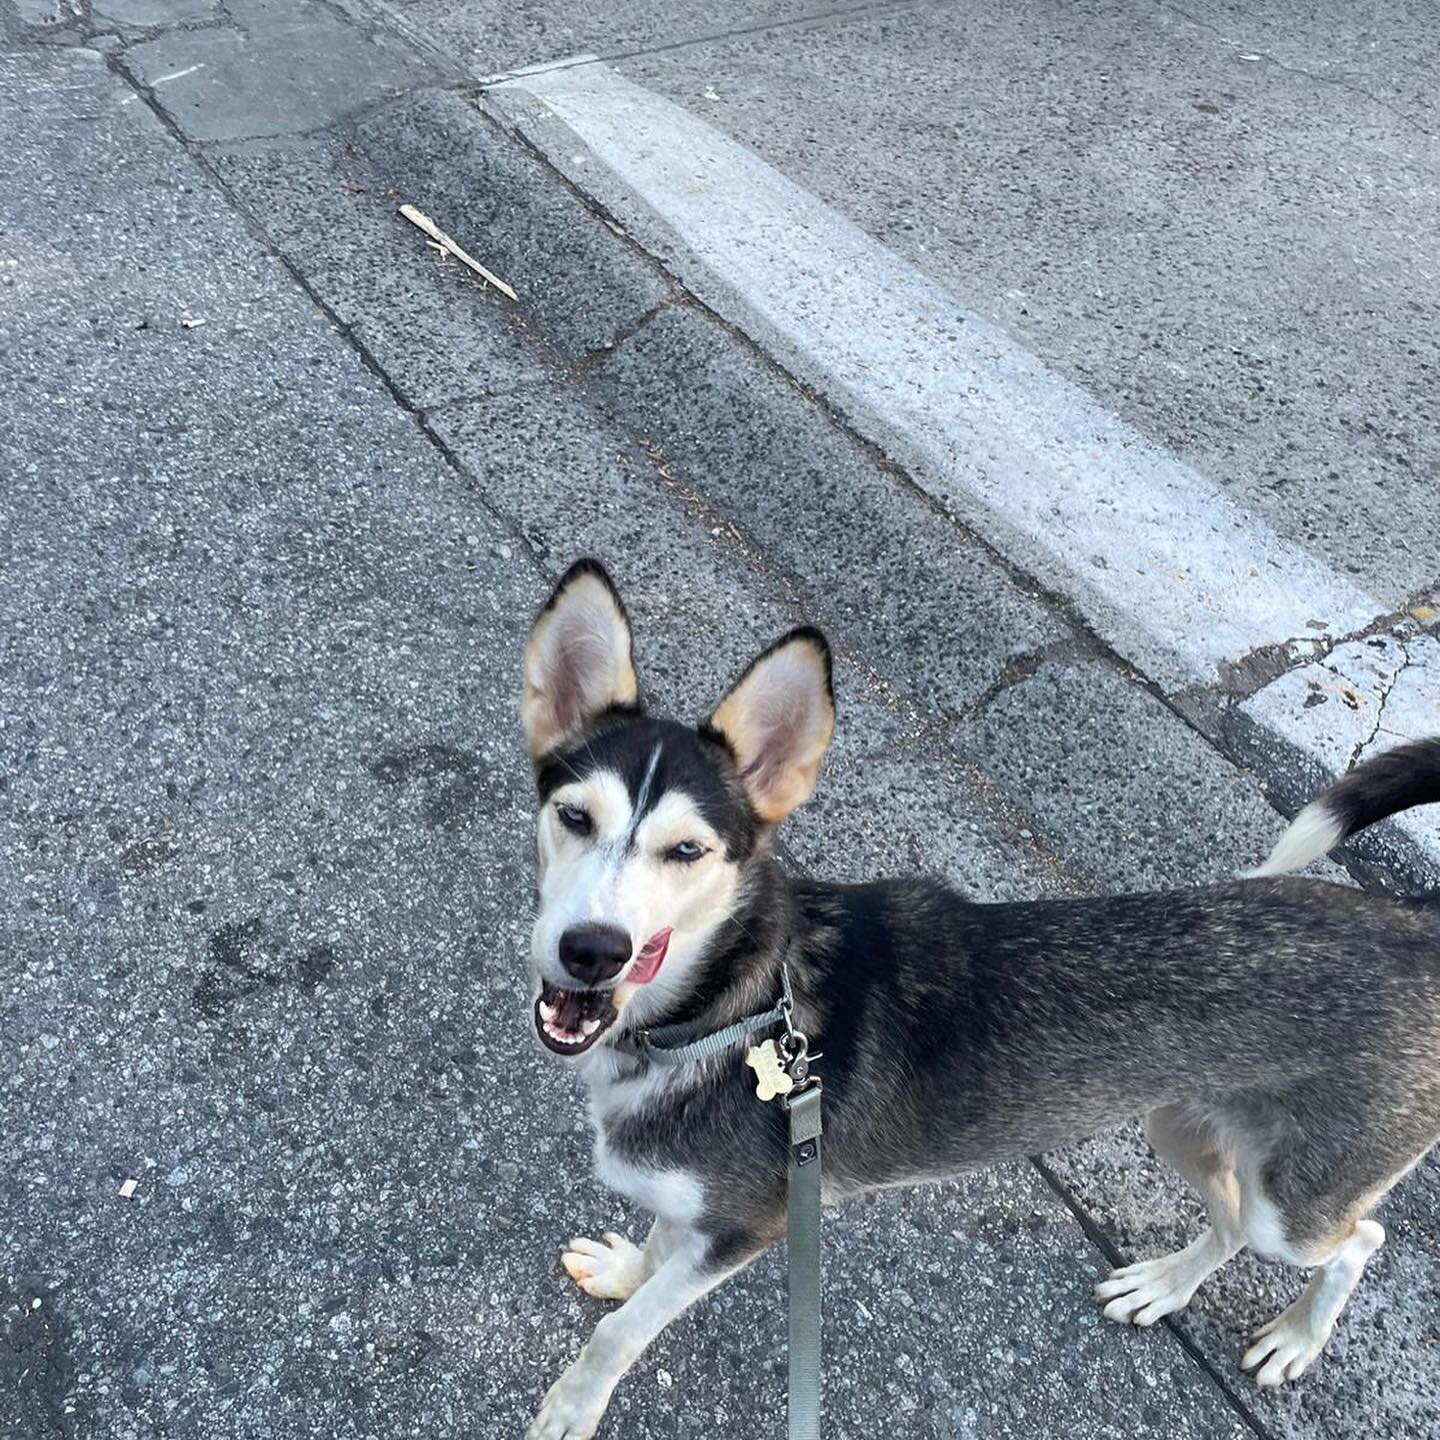 For a stunning dog she&rsquo;s pretty hard to get a good picture of&hellip; MIMI is available and is in Vancouver! This half-Saluki half-Husky hybrid is FULL of all the snuggles and all the smarts. Her posing skills may be inspired by Chandler Bing b